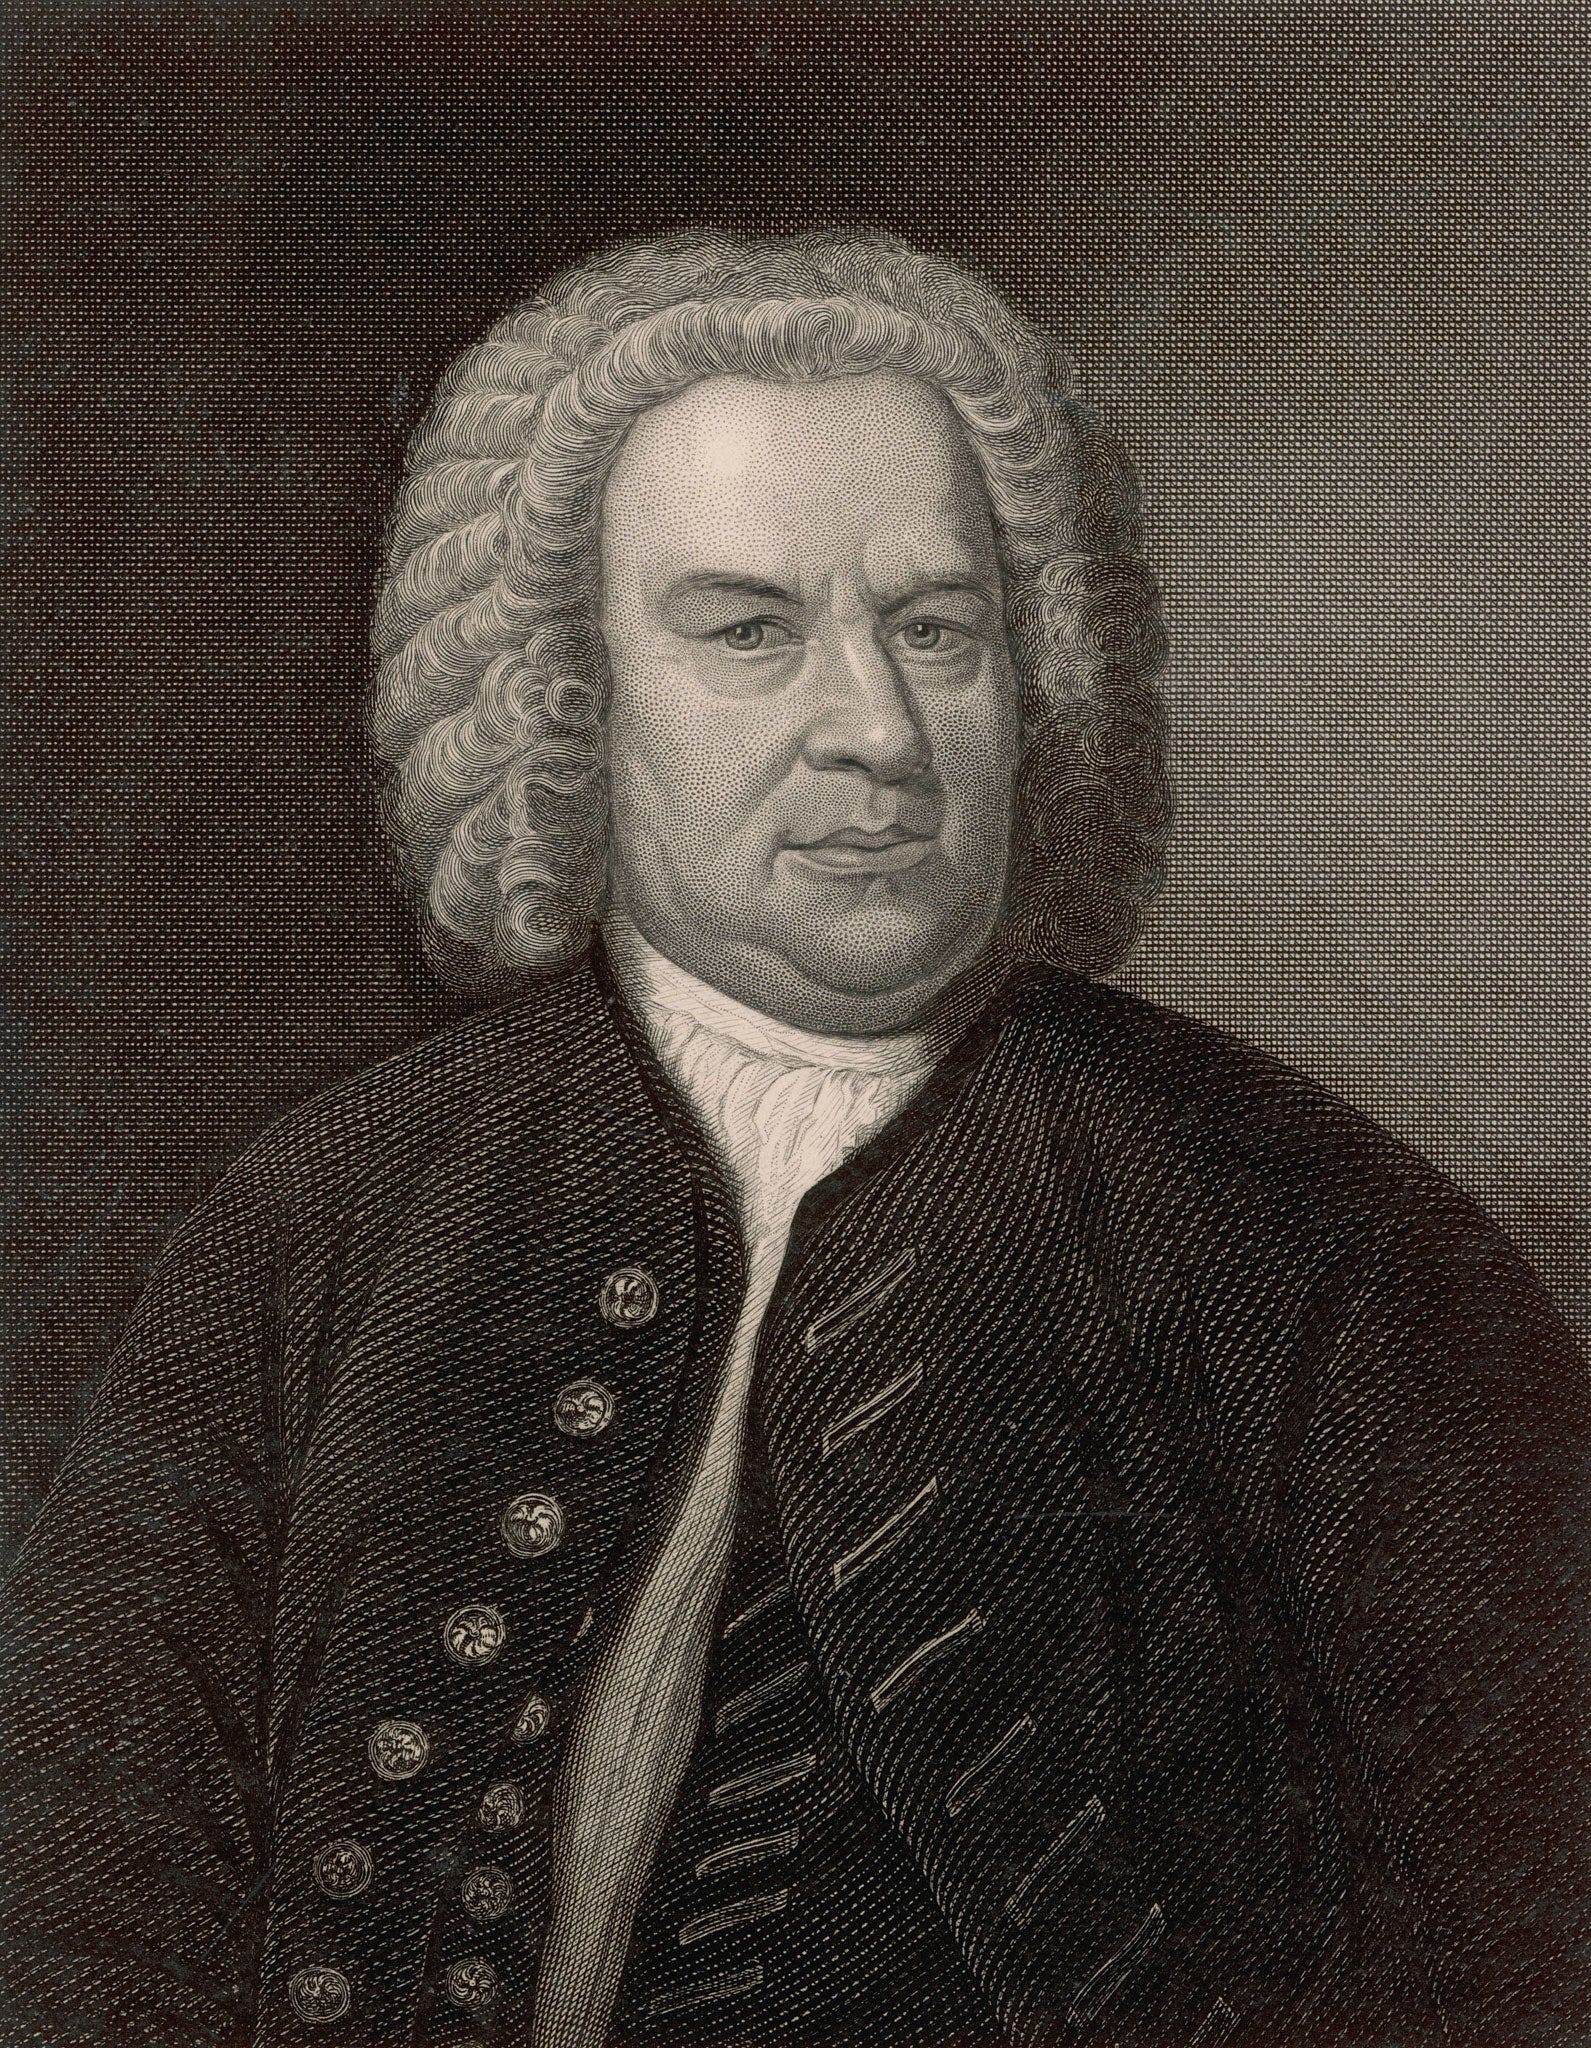 Bach's solo works speak to modern players and listeners as a sort of gold standard, or even holy grail